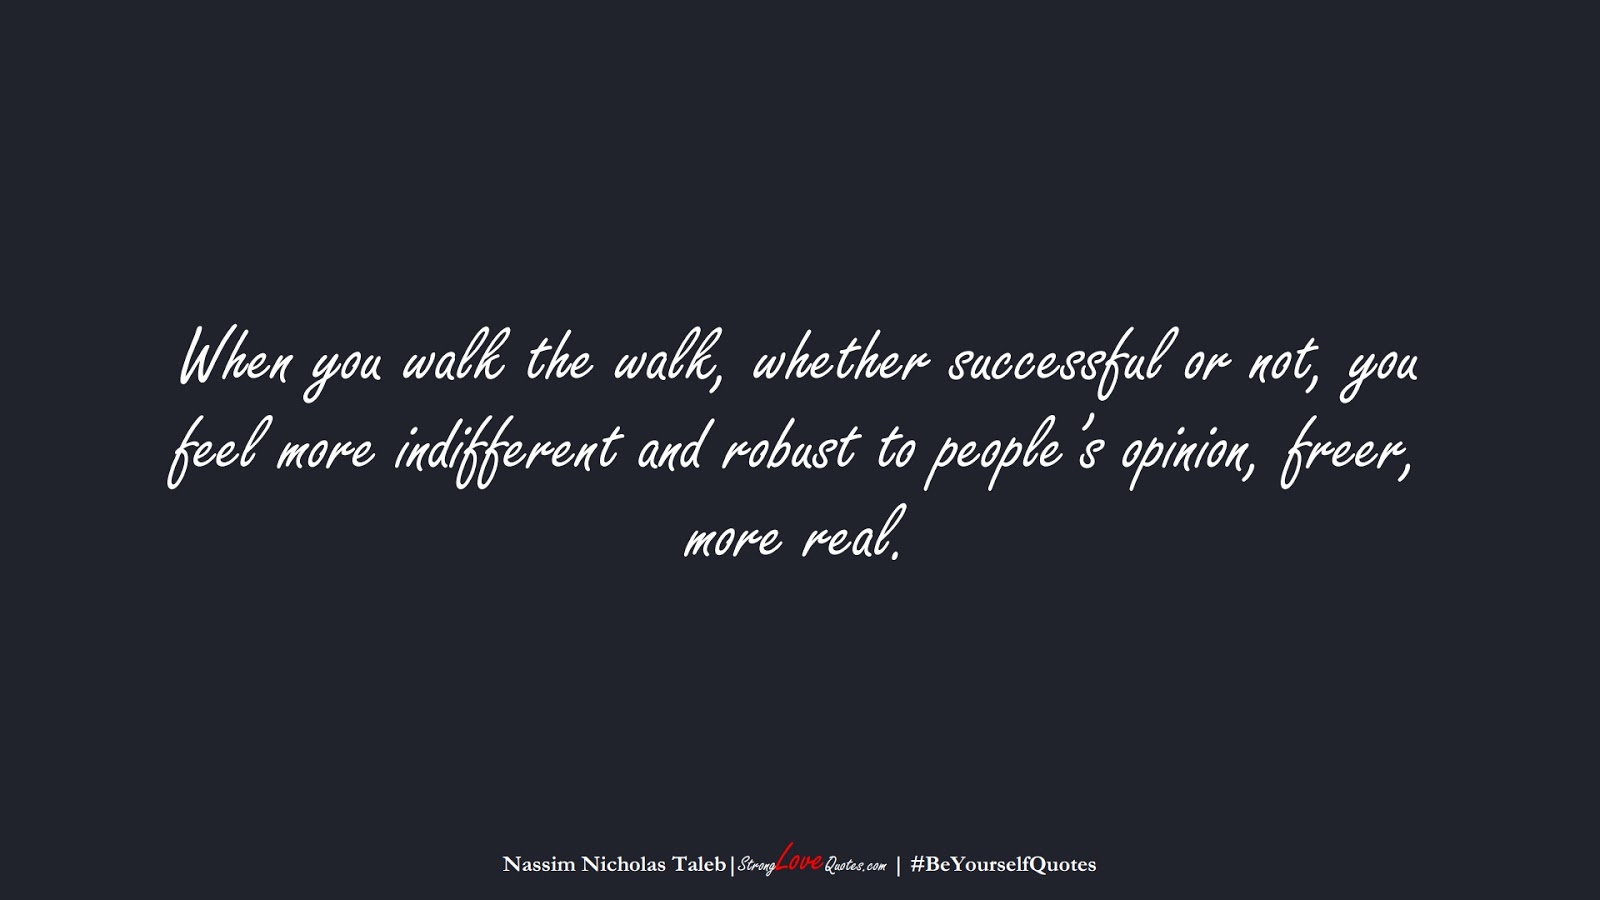 When you walk the walk, whether successful or not, you feel more indifferent and robust to people’s opinion, freer, more real. (Nassim Nicholas Taleb);  #BeYourselfQuotes